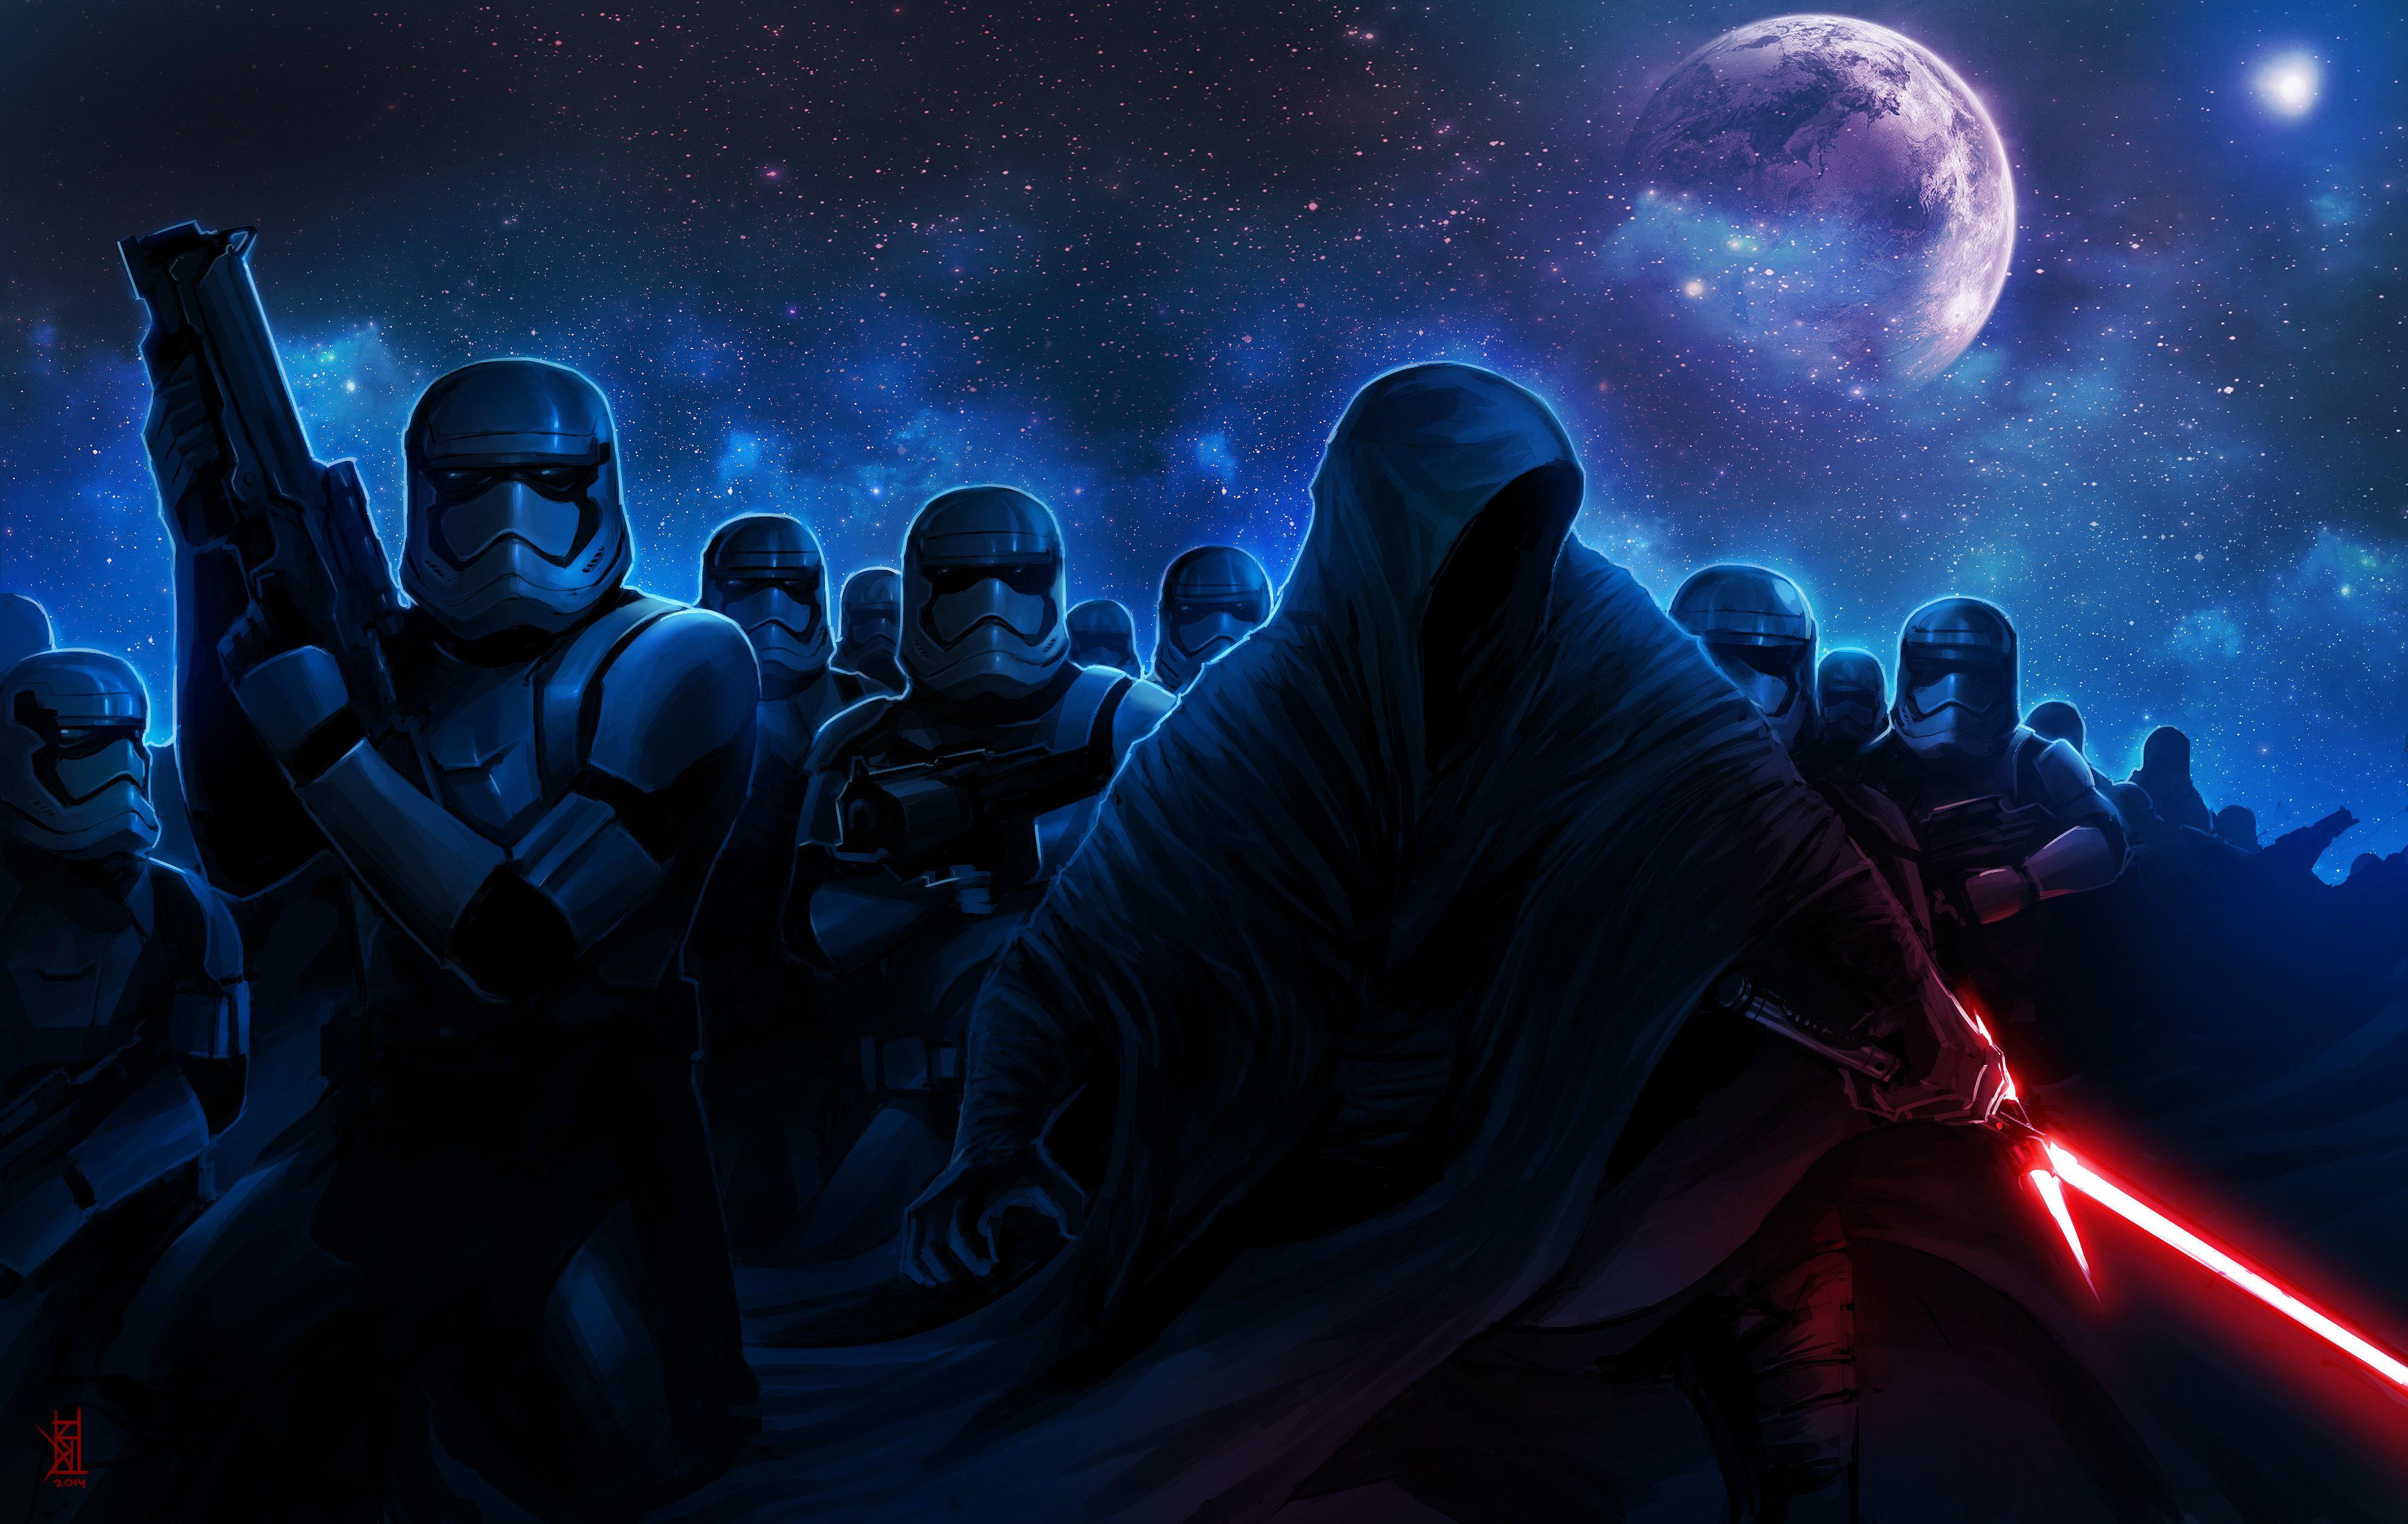 star wars animated wallpaper youtube